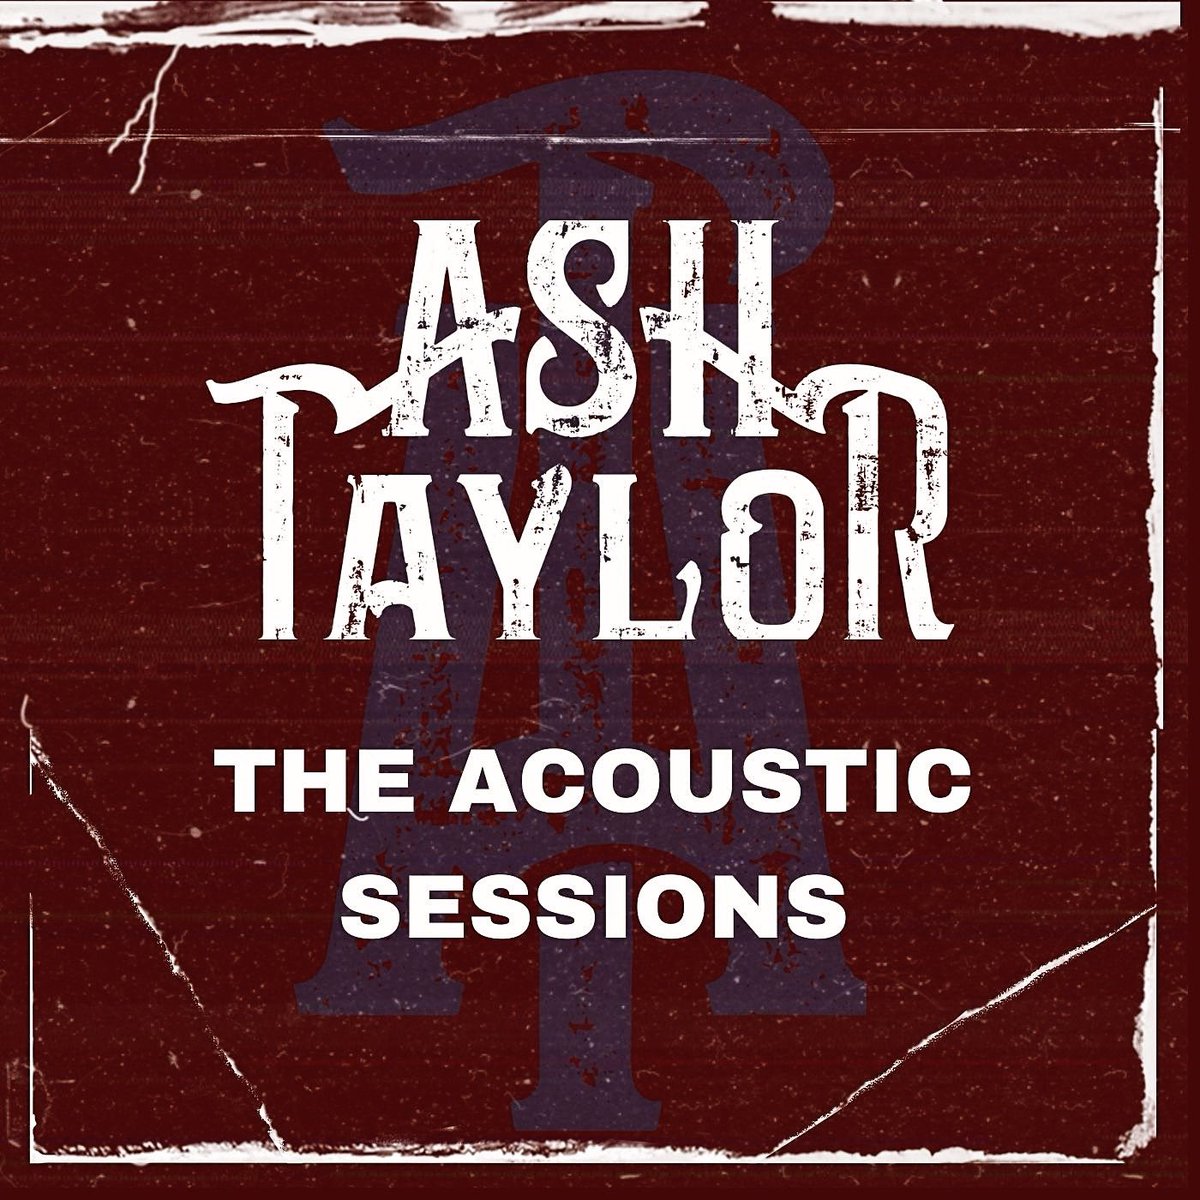 My EP THE ACOUSTIC SESSIONS Turns 1️⃣year old today! 🎉 💿 🎶✨🎙️

Thanks for all the love you’ve shown this project ❤️🤍💙

open.spotify.com/album/51mZfleV…

#acousticguitar #Acousticmusic #AshTaylor #EP #Musician #singersongwriter #Grateful